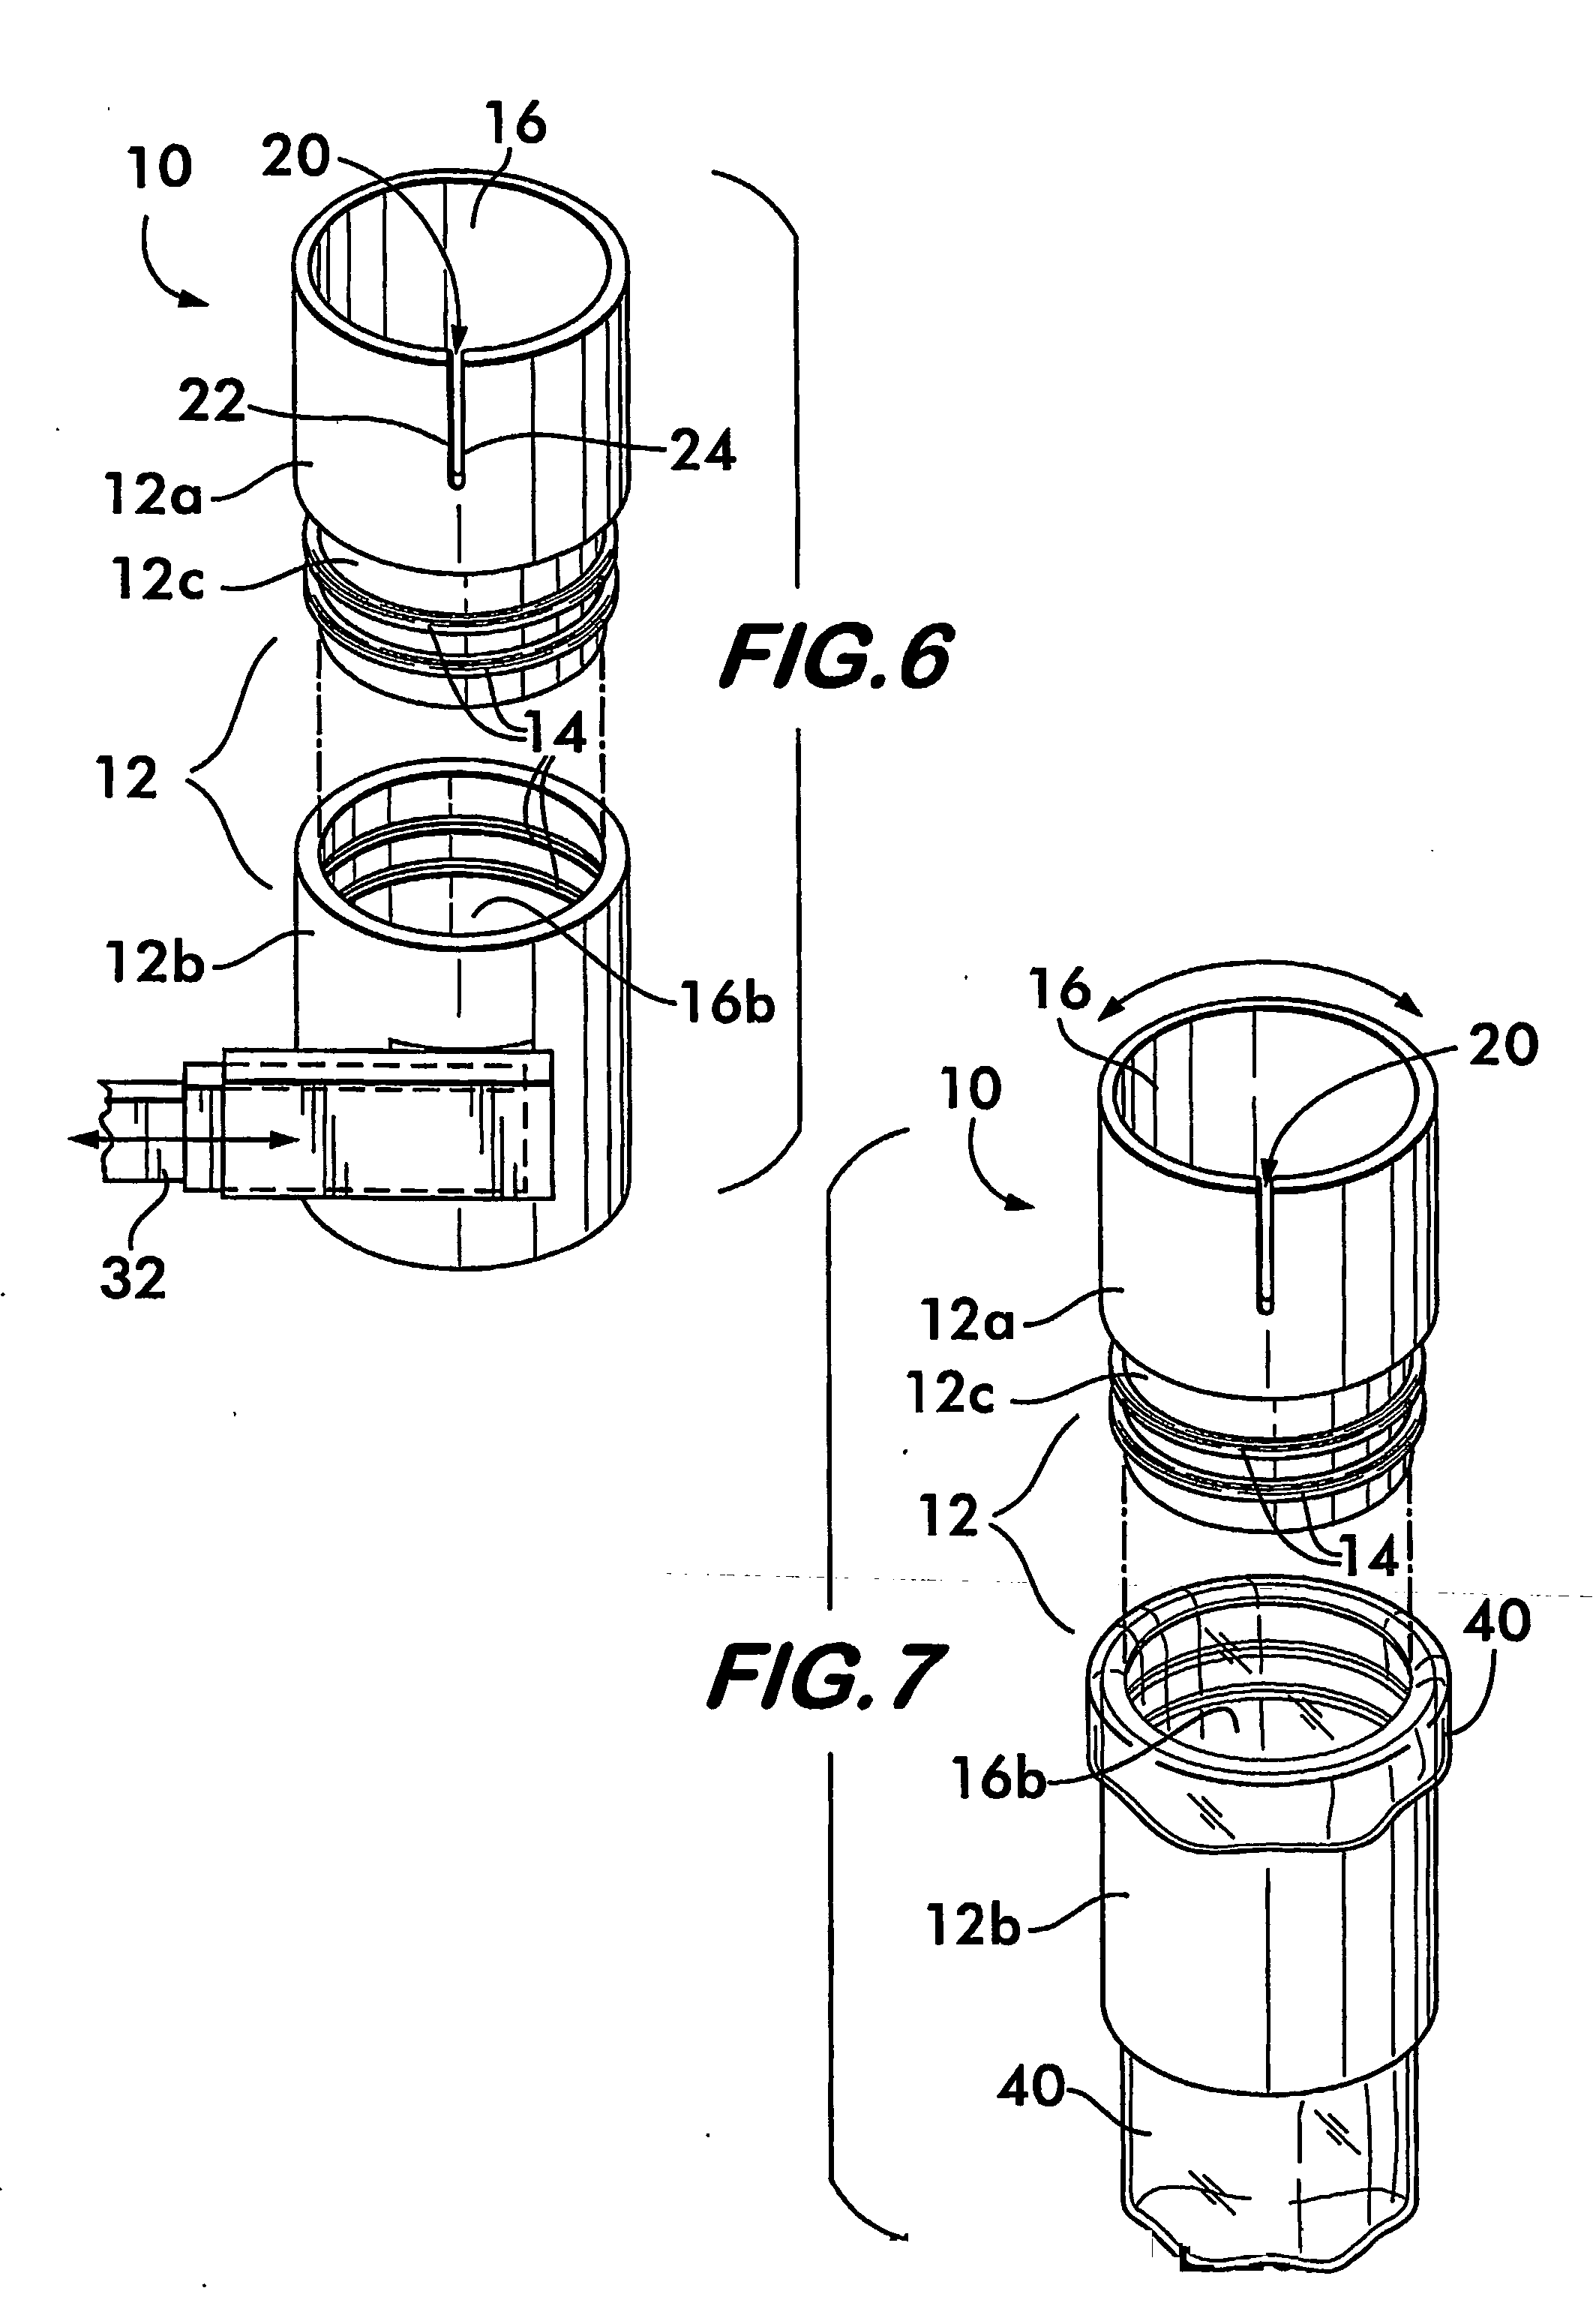 Sanitary support device for a medical instrument